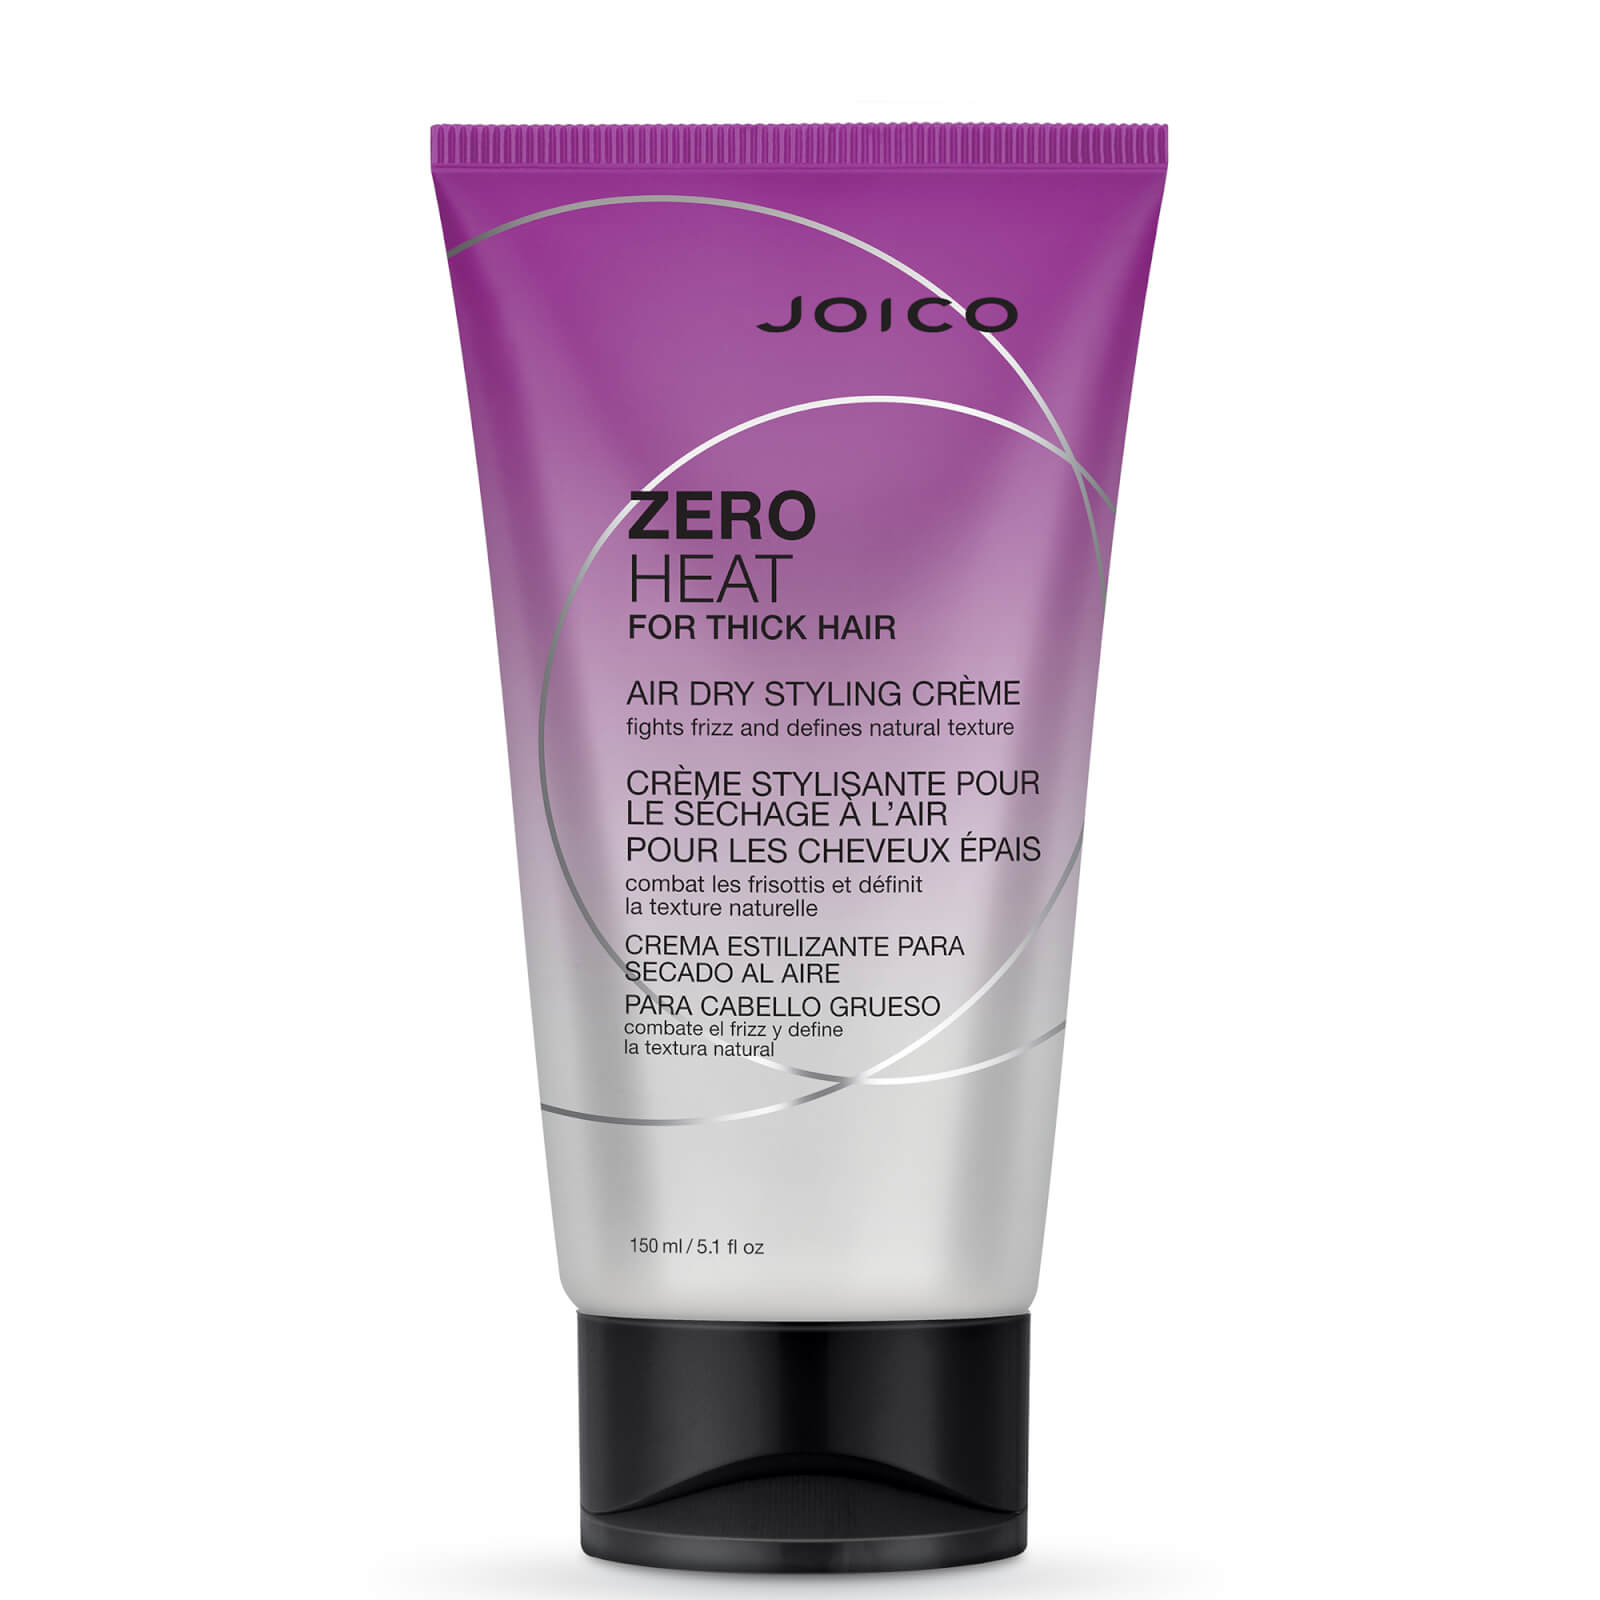 Joico Zero Heat For Thick Hair Air Dry Styling Crème 150ml von Joico